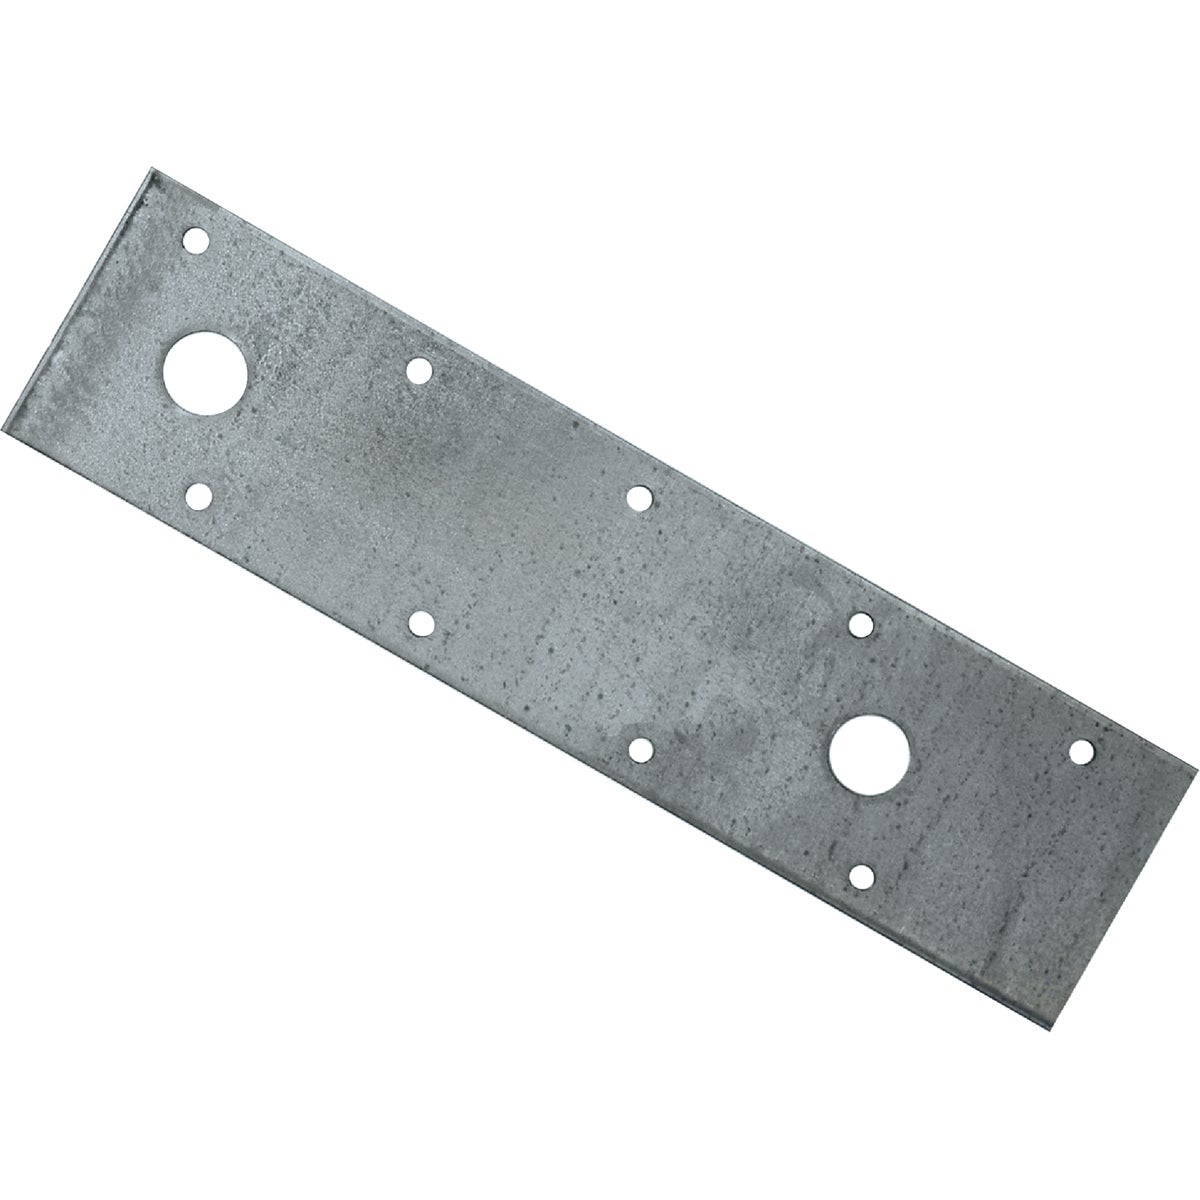 Item 106539, Straps are designed to transfer tension loads in a wide variety of 